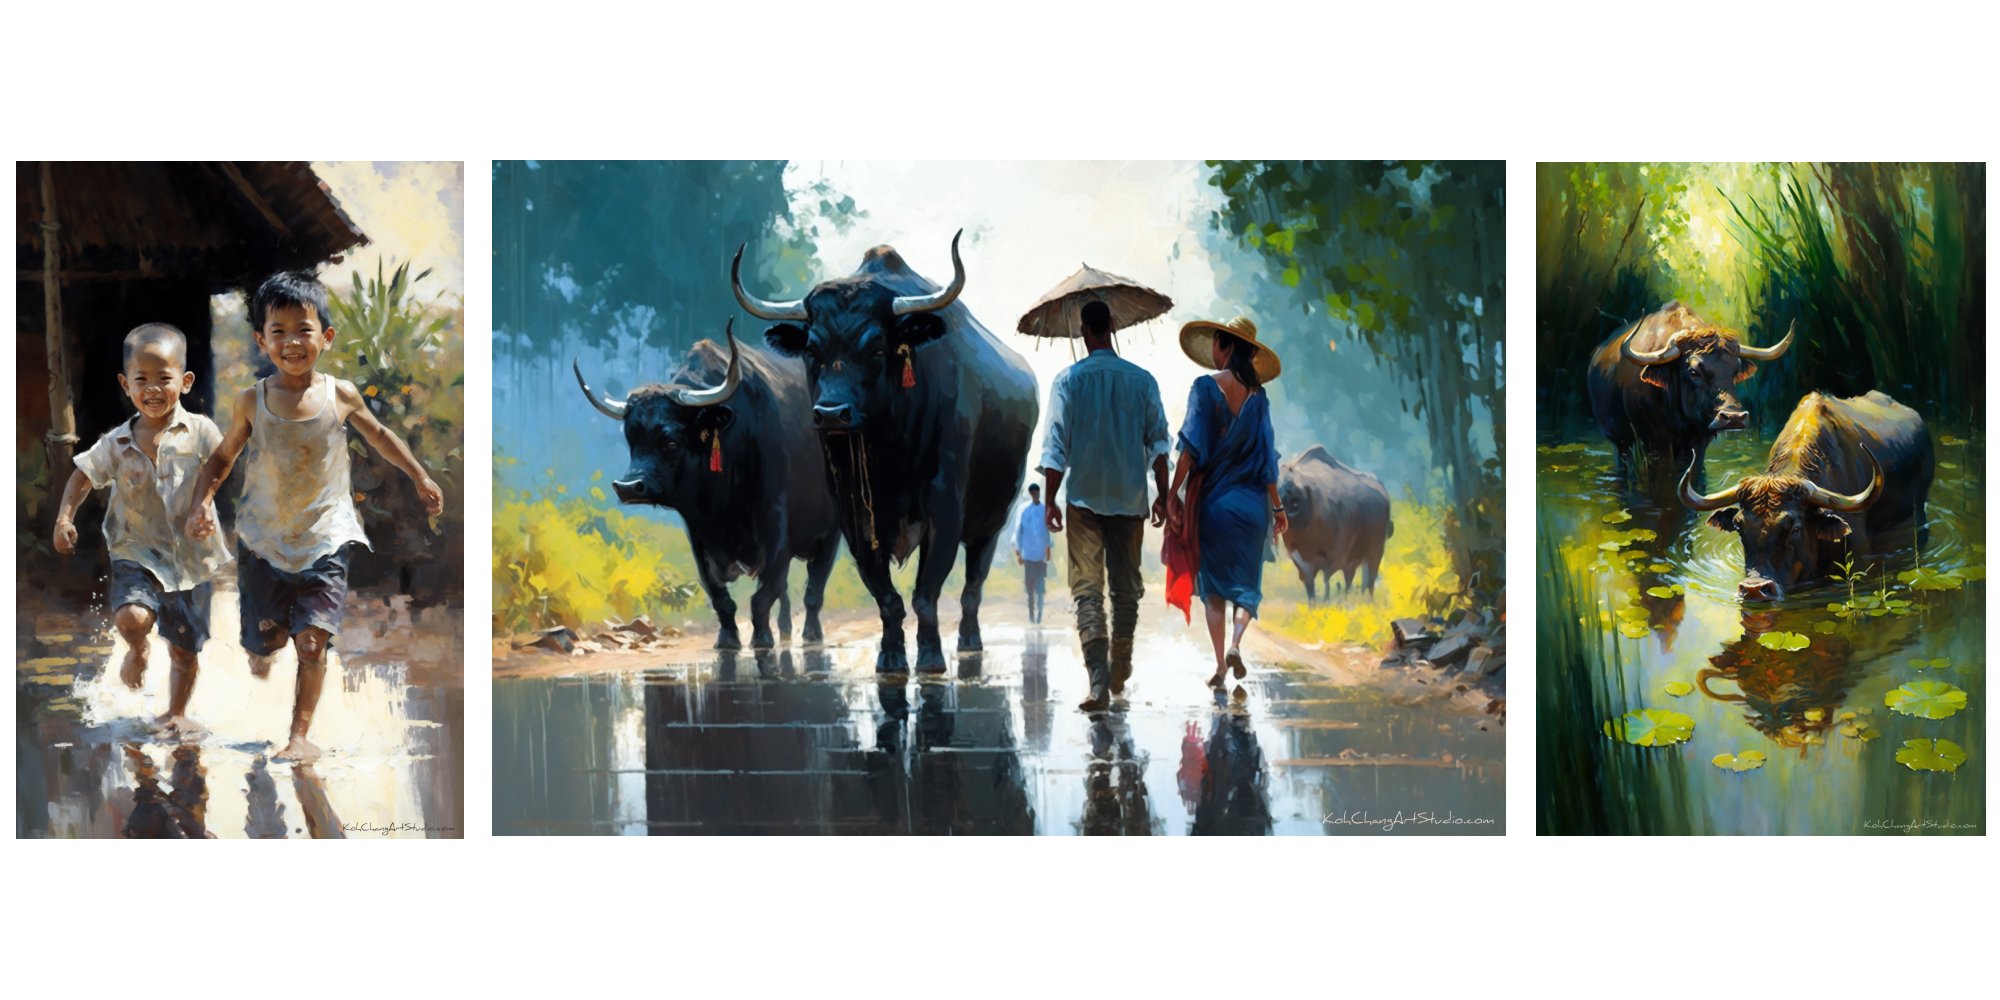 RAINY RENDEZ-VOUS Artistic Design - Love navigating rain-kissed paths, youthful spirits, and buffaloes among water lilies.